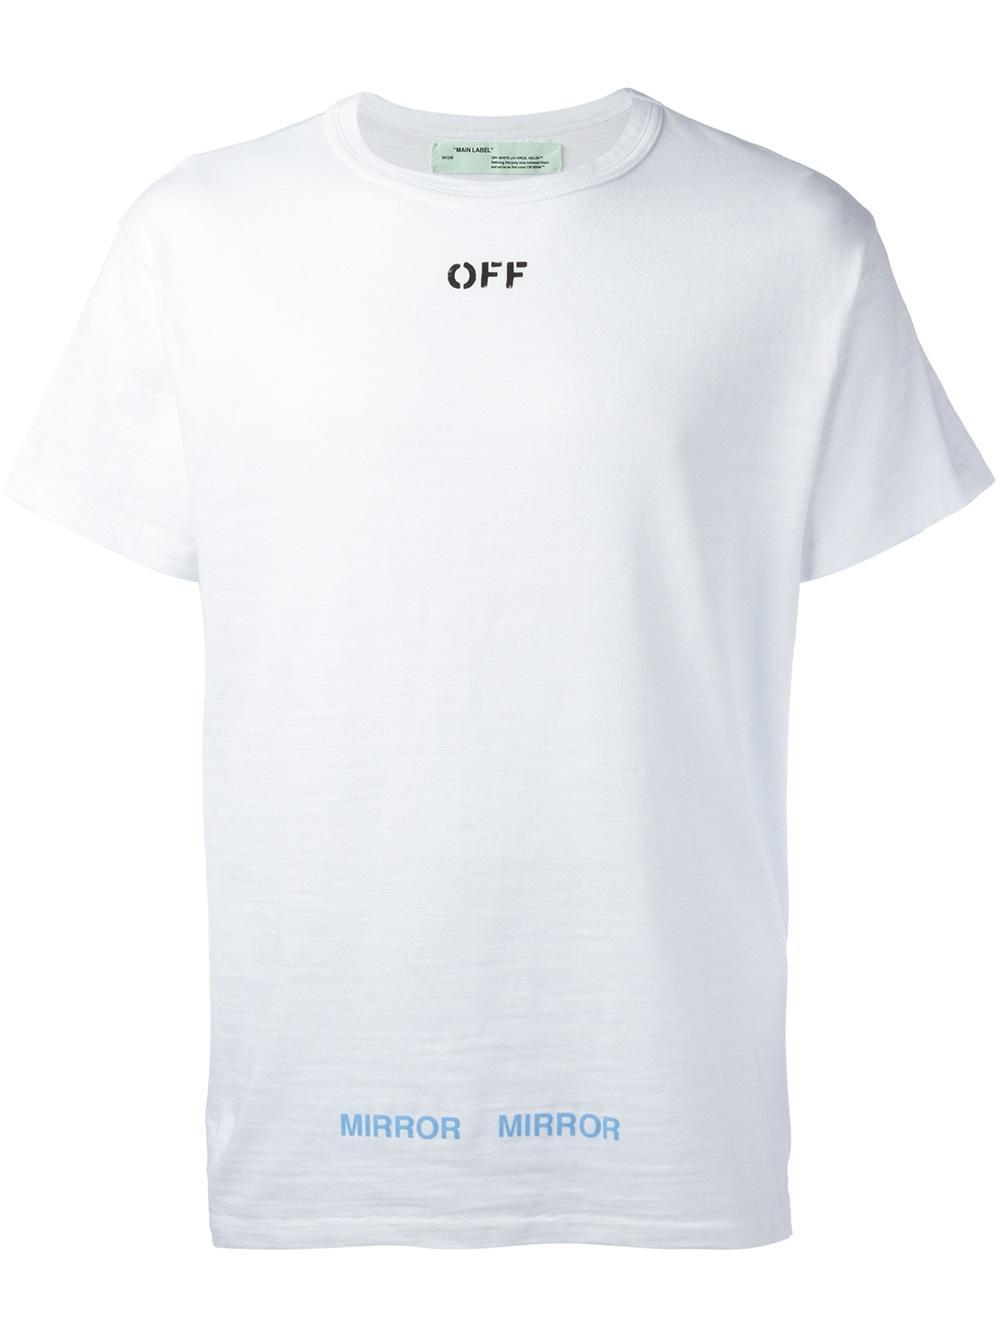 Tシャツ/カットソー(半袖/袖なし)THE END off-white Tシャツ virgil abloh着用